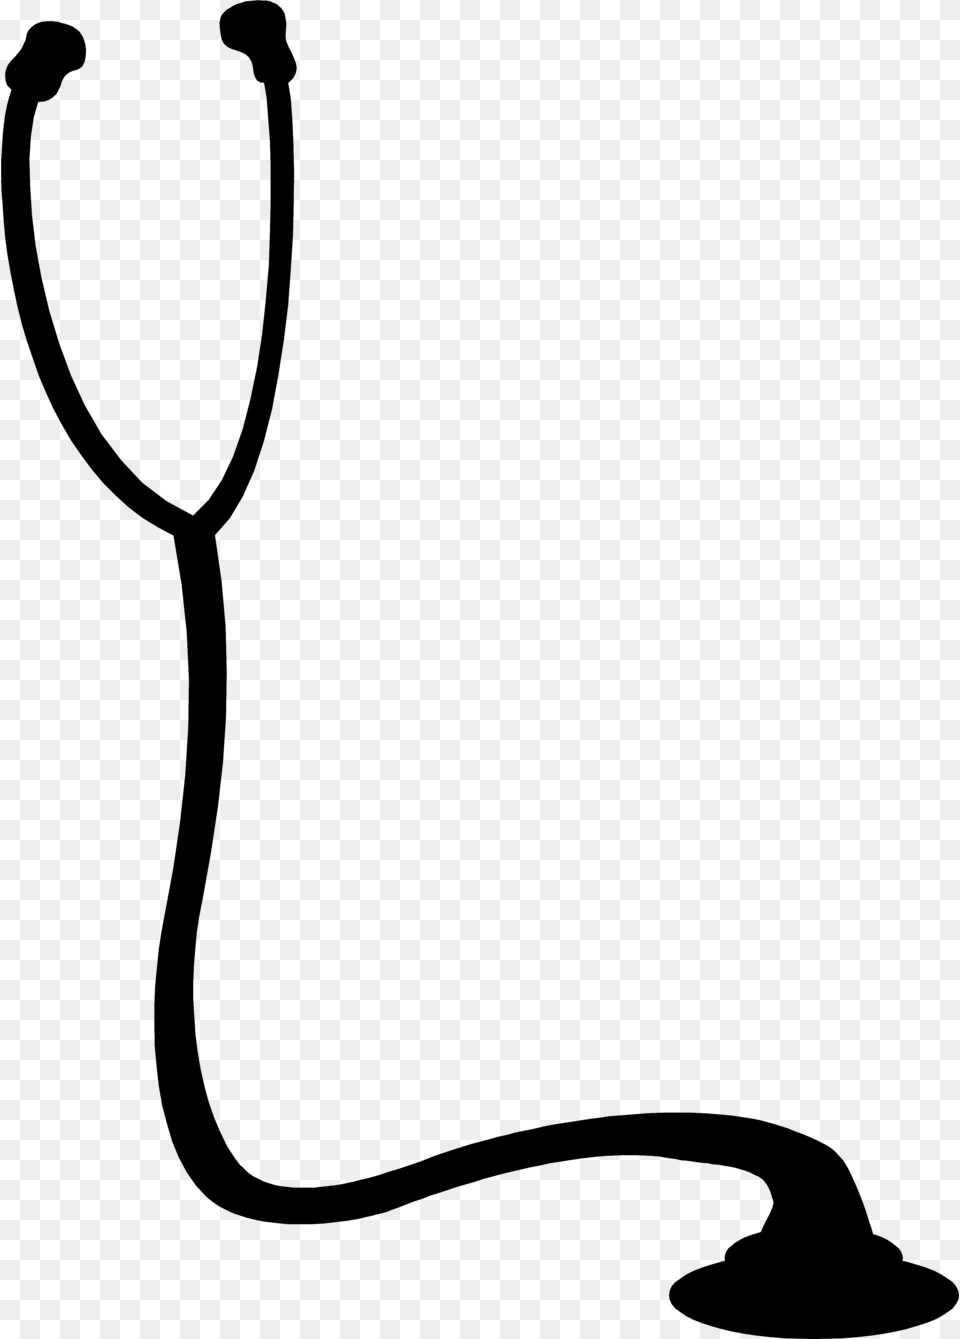 Stethoscope Vector Transparent Background Black And White Stethoscope, Gray Png